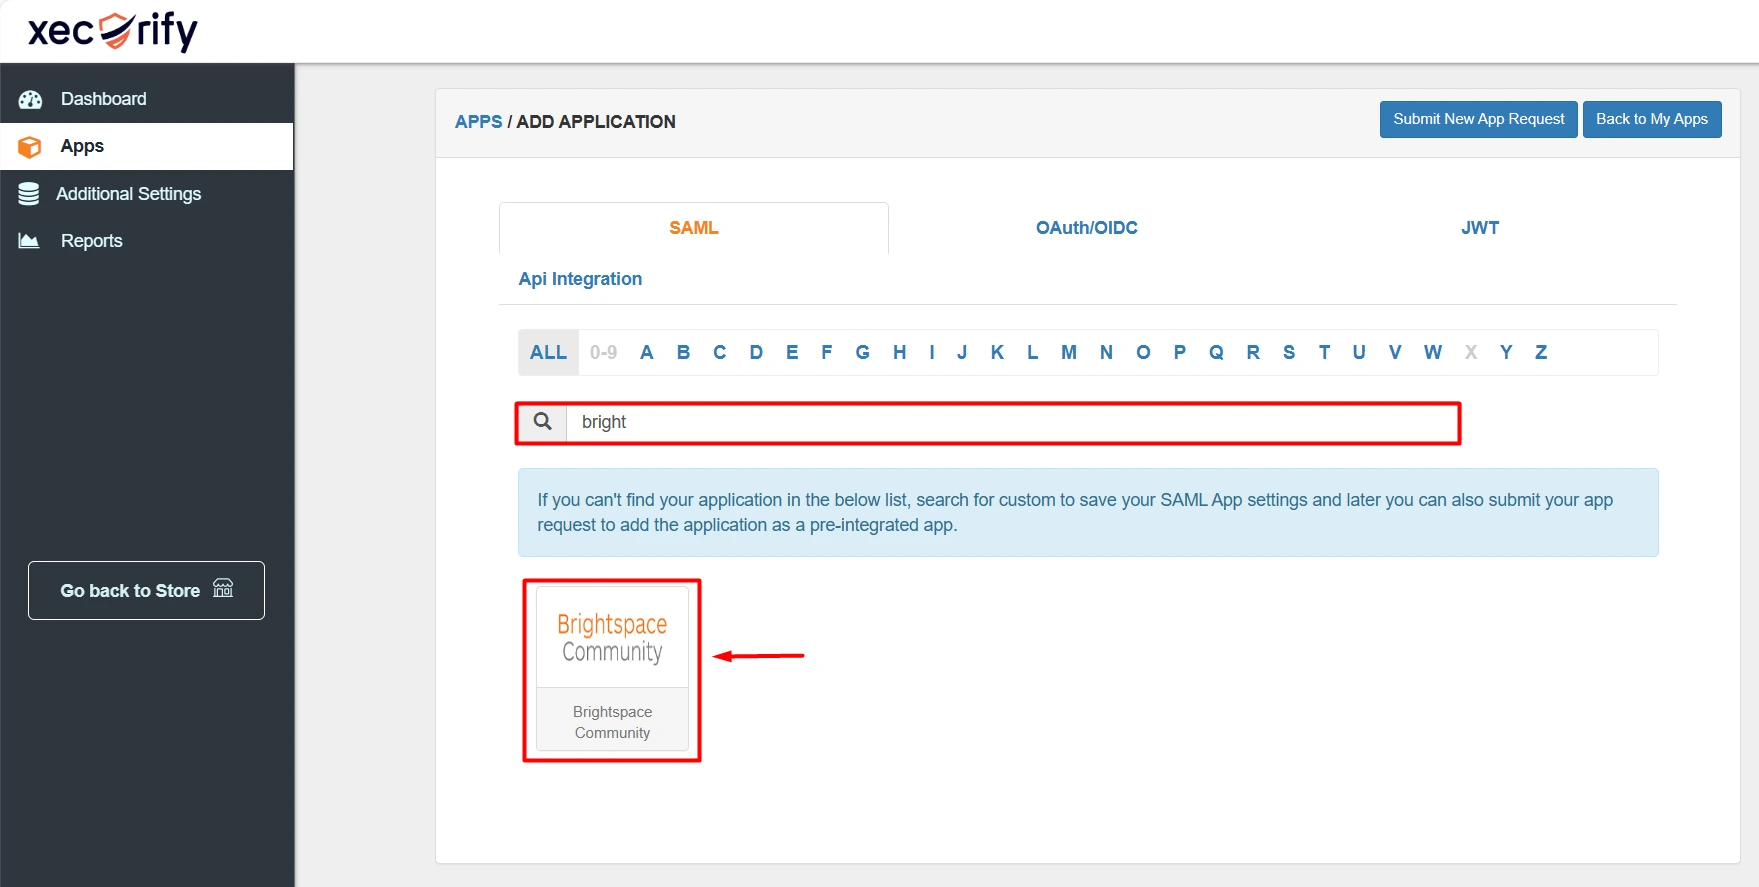 miniOrange Brightspace SSO using Shopify as IDP - Select Brightspace